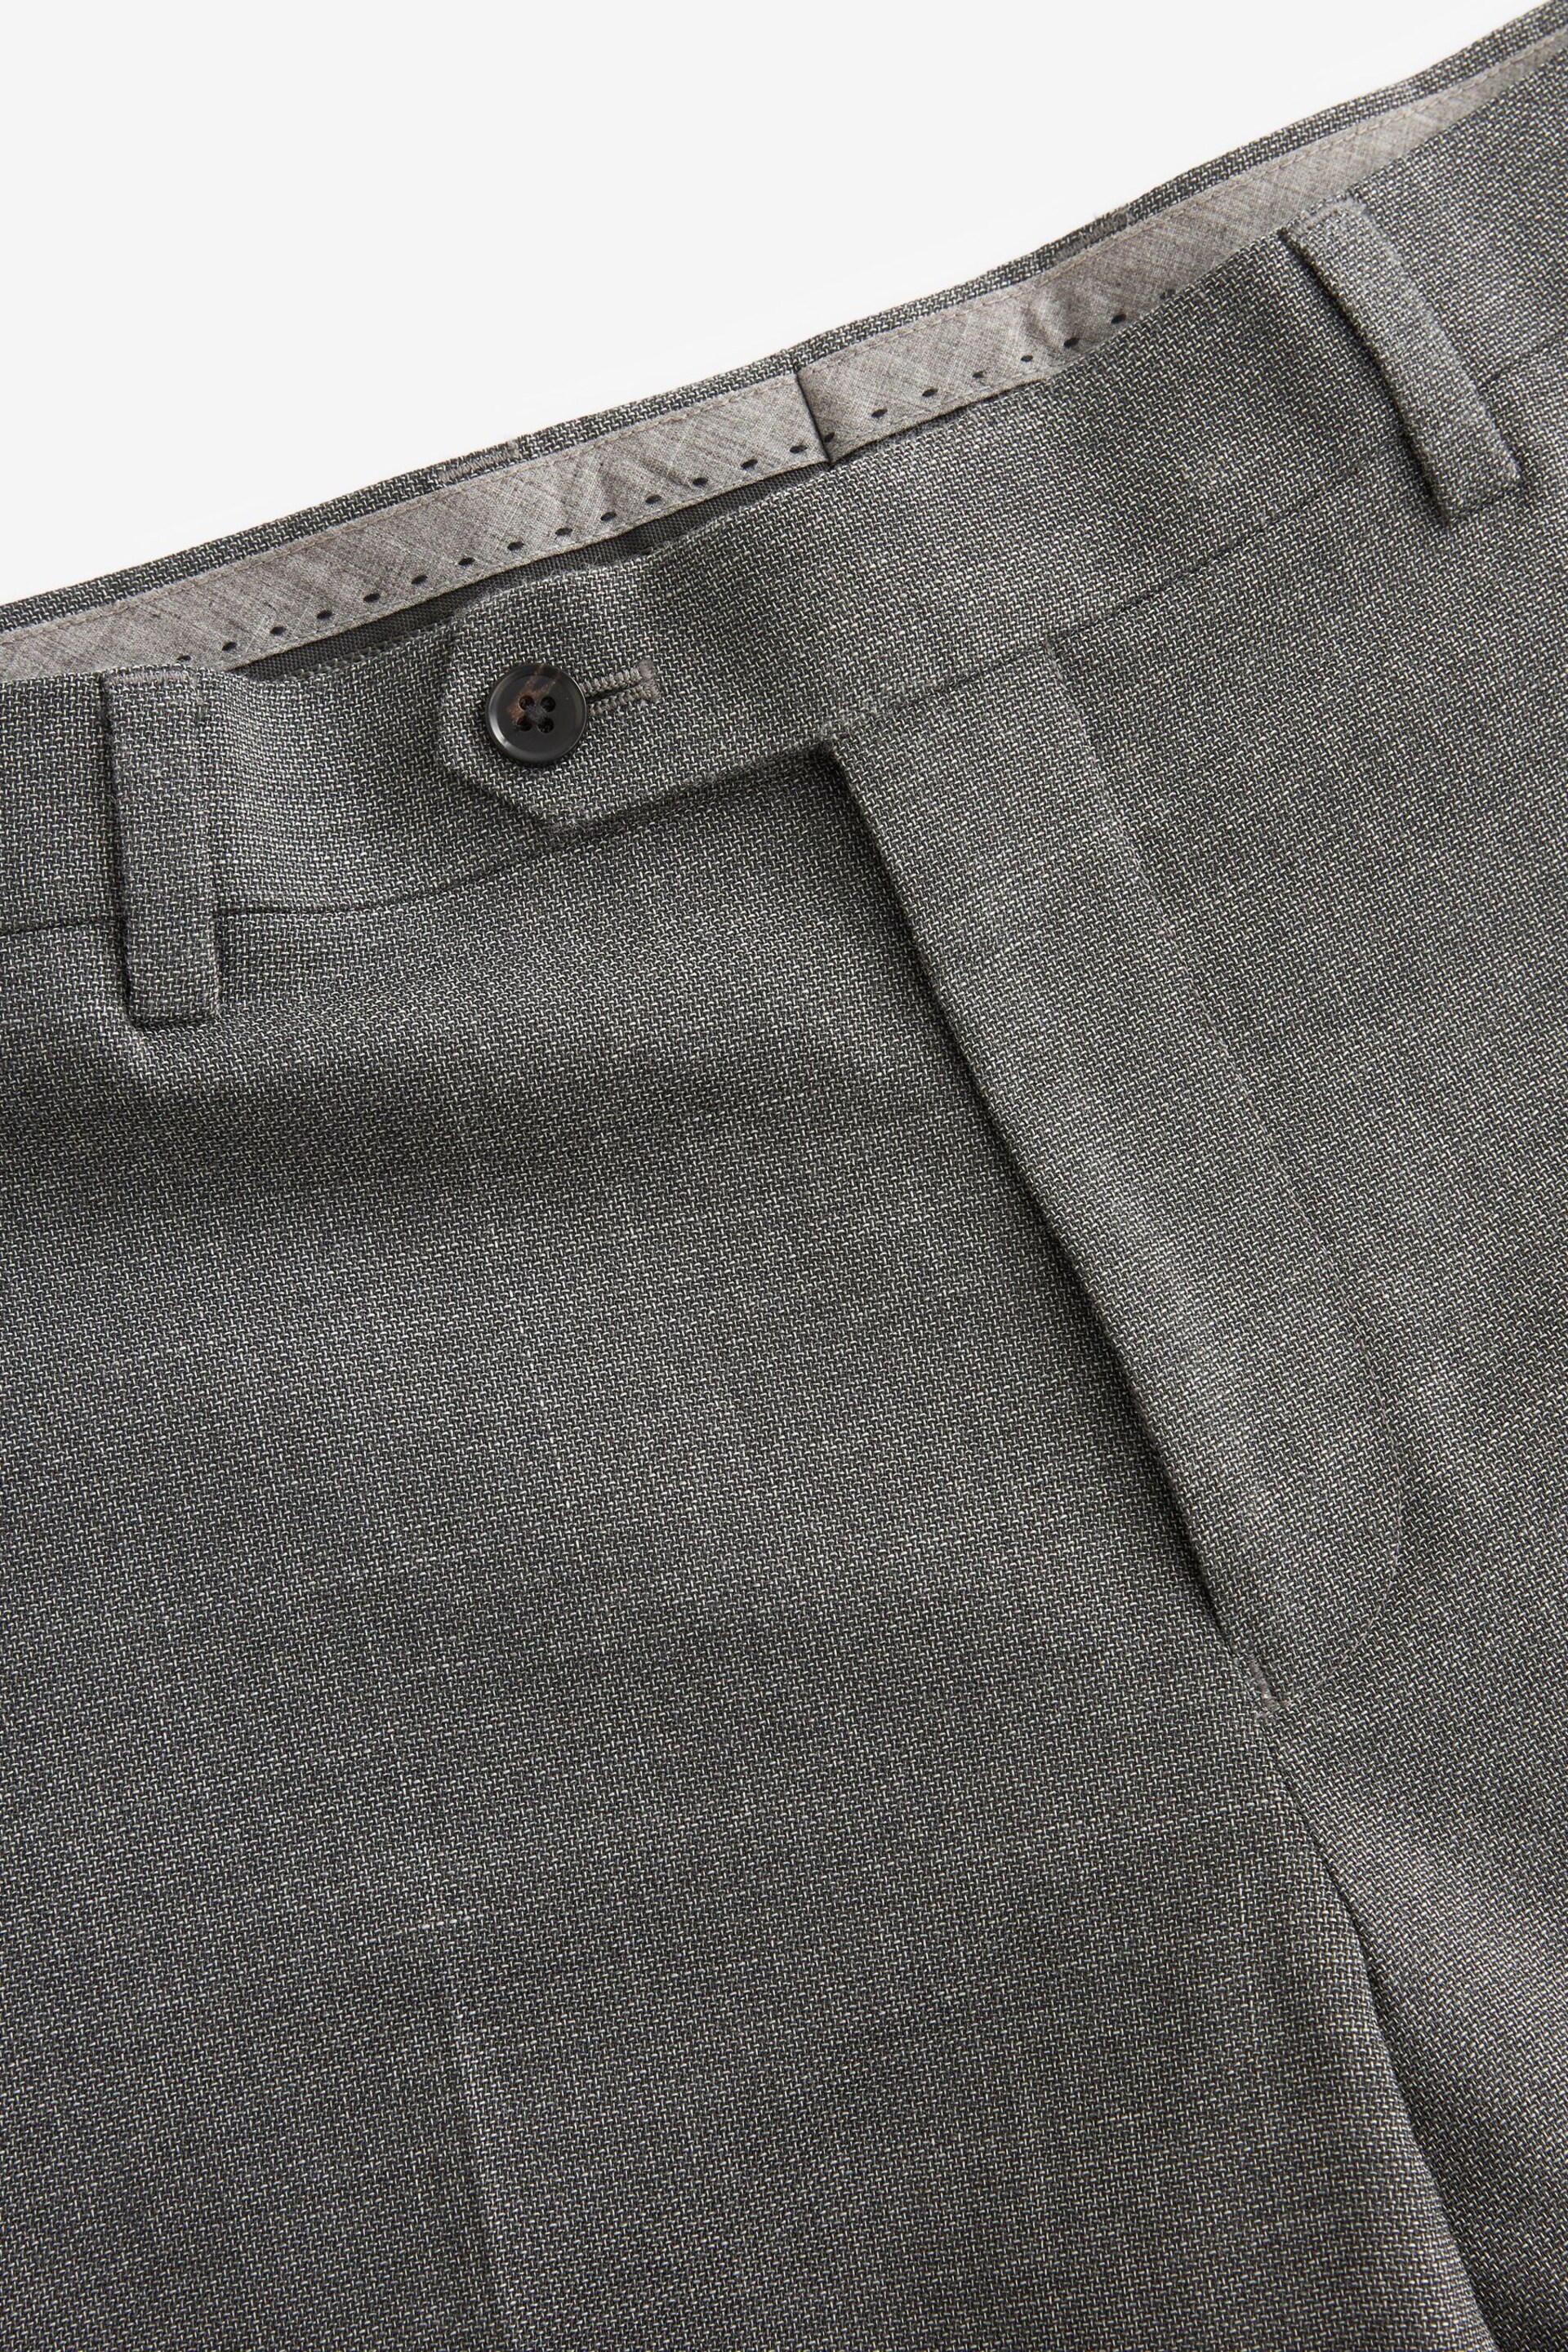 Grey Slim Fit Signature Marzotto Italian Fabric Textured Suit: Trousers - Image 8 of 11